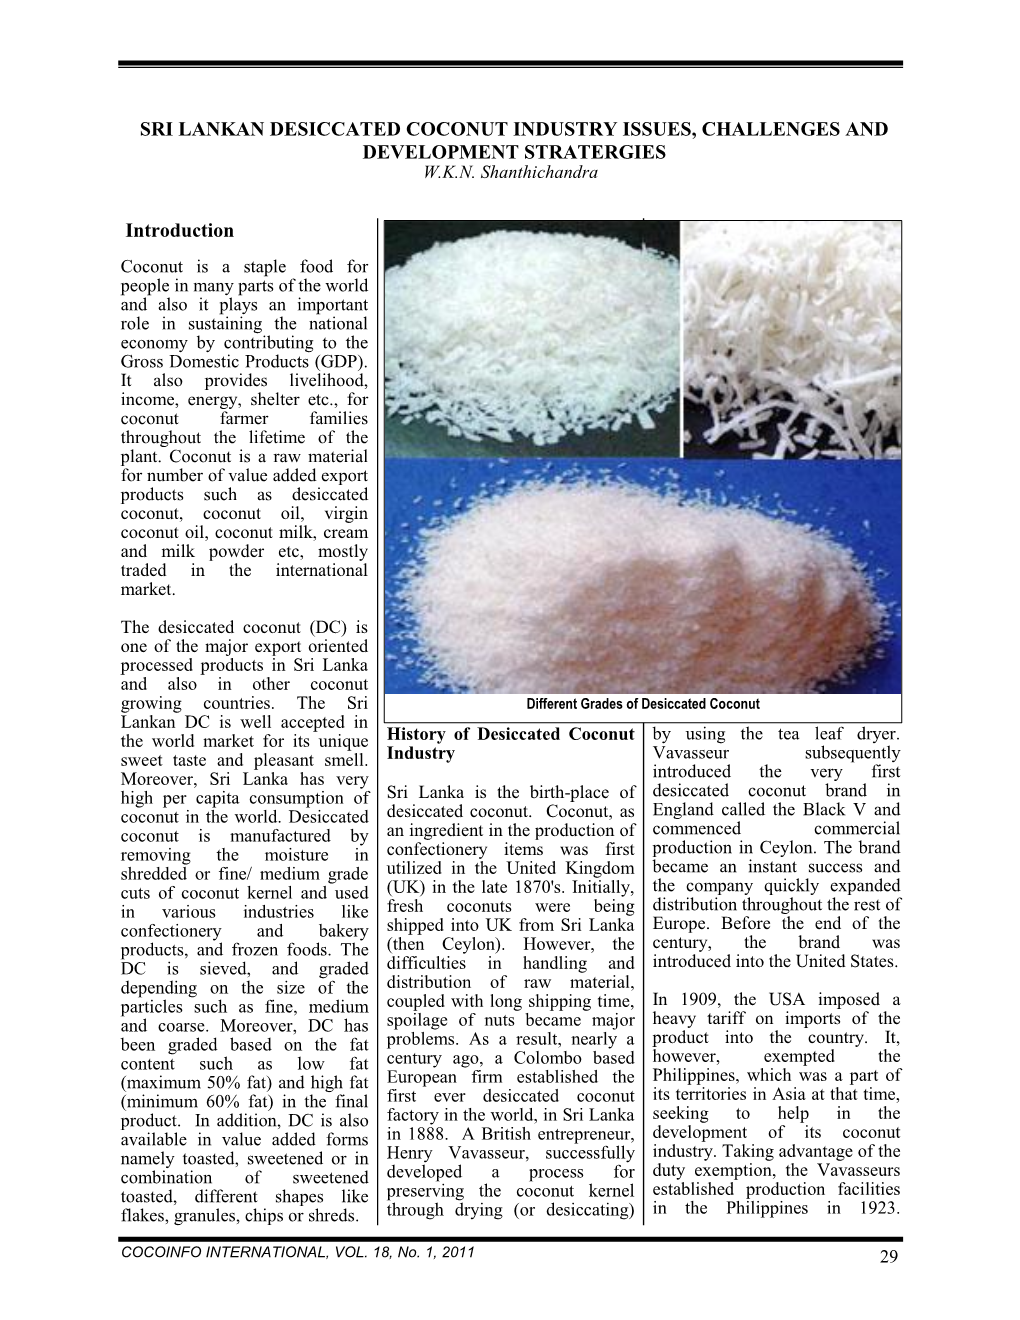 Thailand's Biodiesel from Coconut Oil